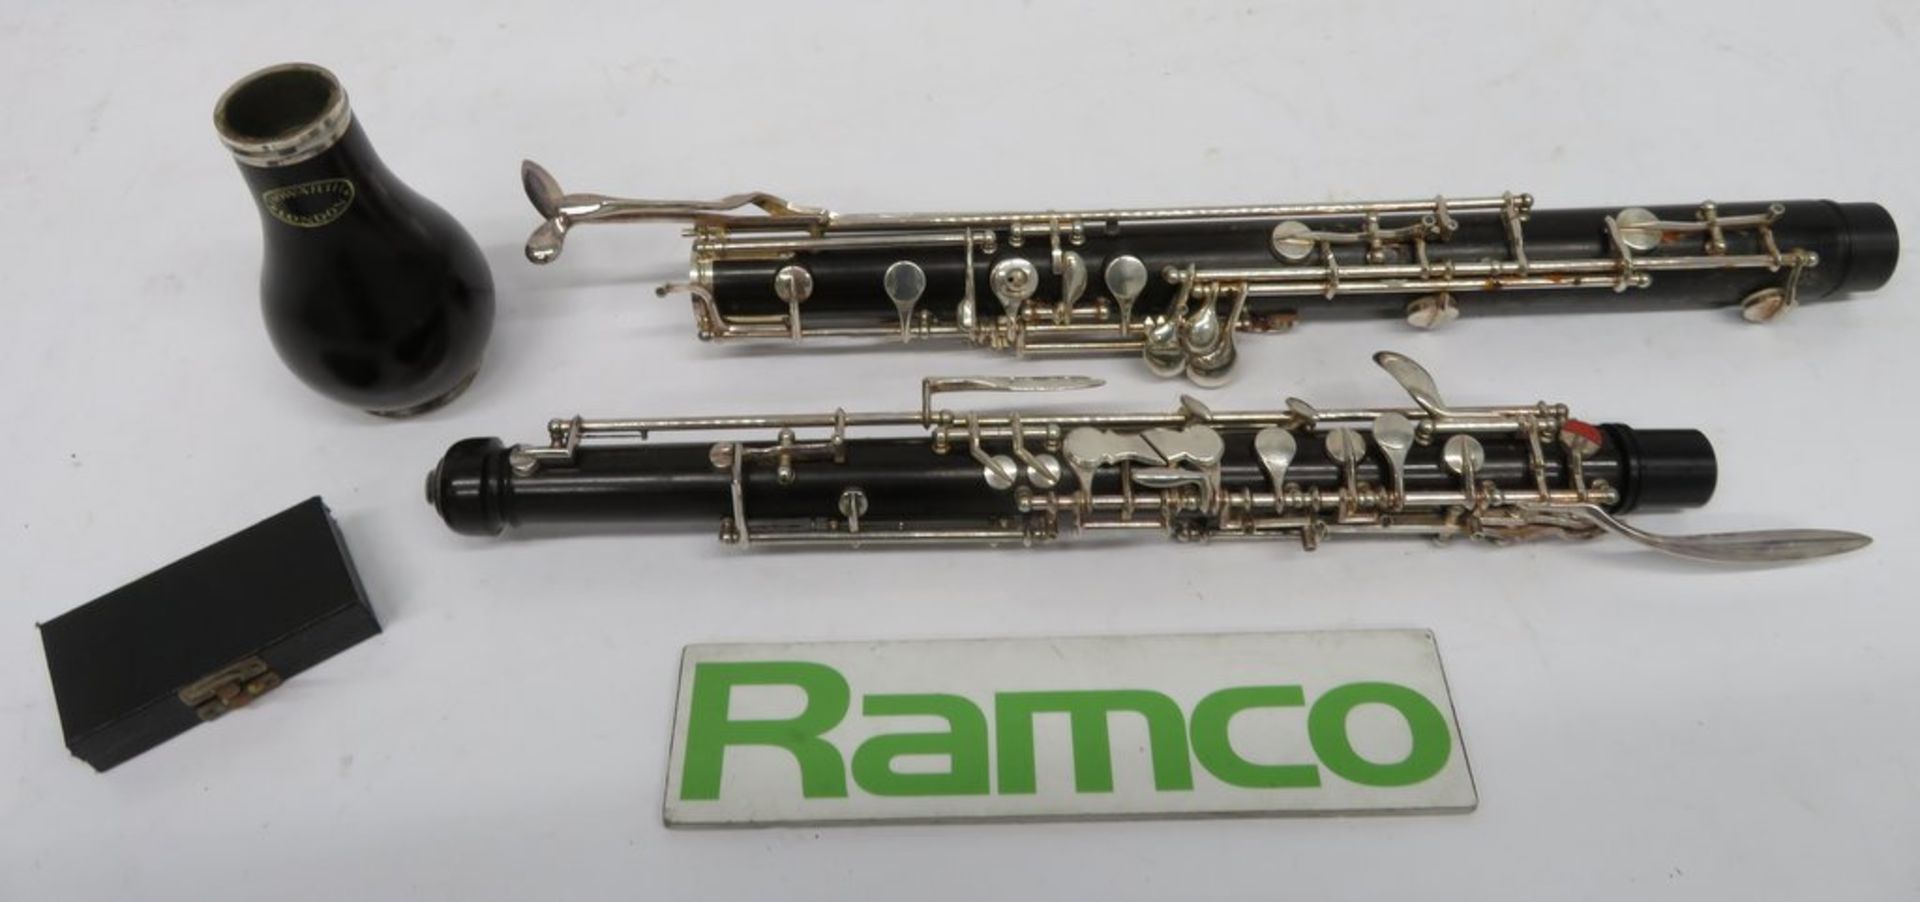 Howarth Cor Anglais S20C With Case. Serial Number: D0400. Please Note That This Item Has - Image 3 of 20